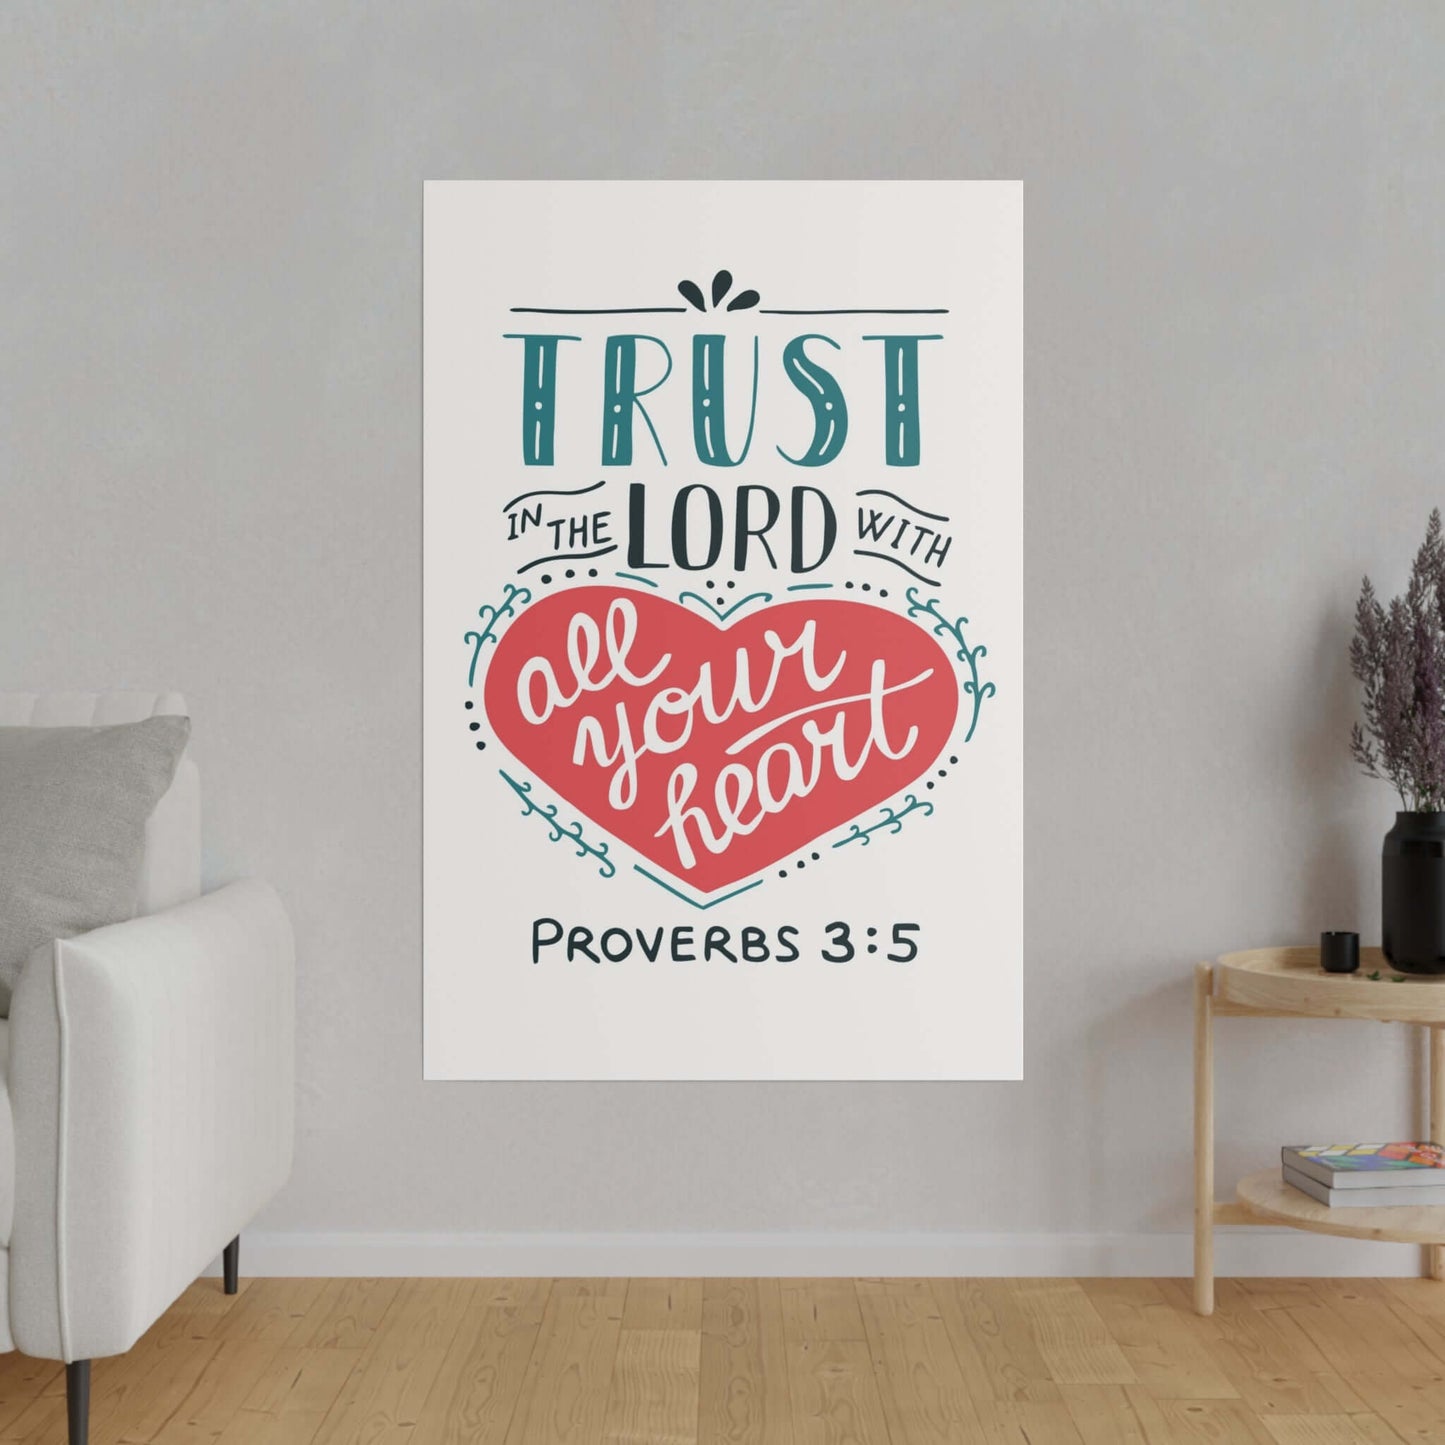 Inspirational Bedroom Canvas Art with Proverbs 3:5 - Eco-Friendly & Durable | Art & Wall Decor,Canvas,Decor,Eco-friendly,Hanging Hardware,Holiday Picks,Home & Living,Indoor,Matte,Seasonal Picks,Sustainable,Wall,Wood